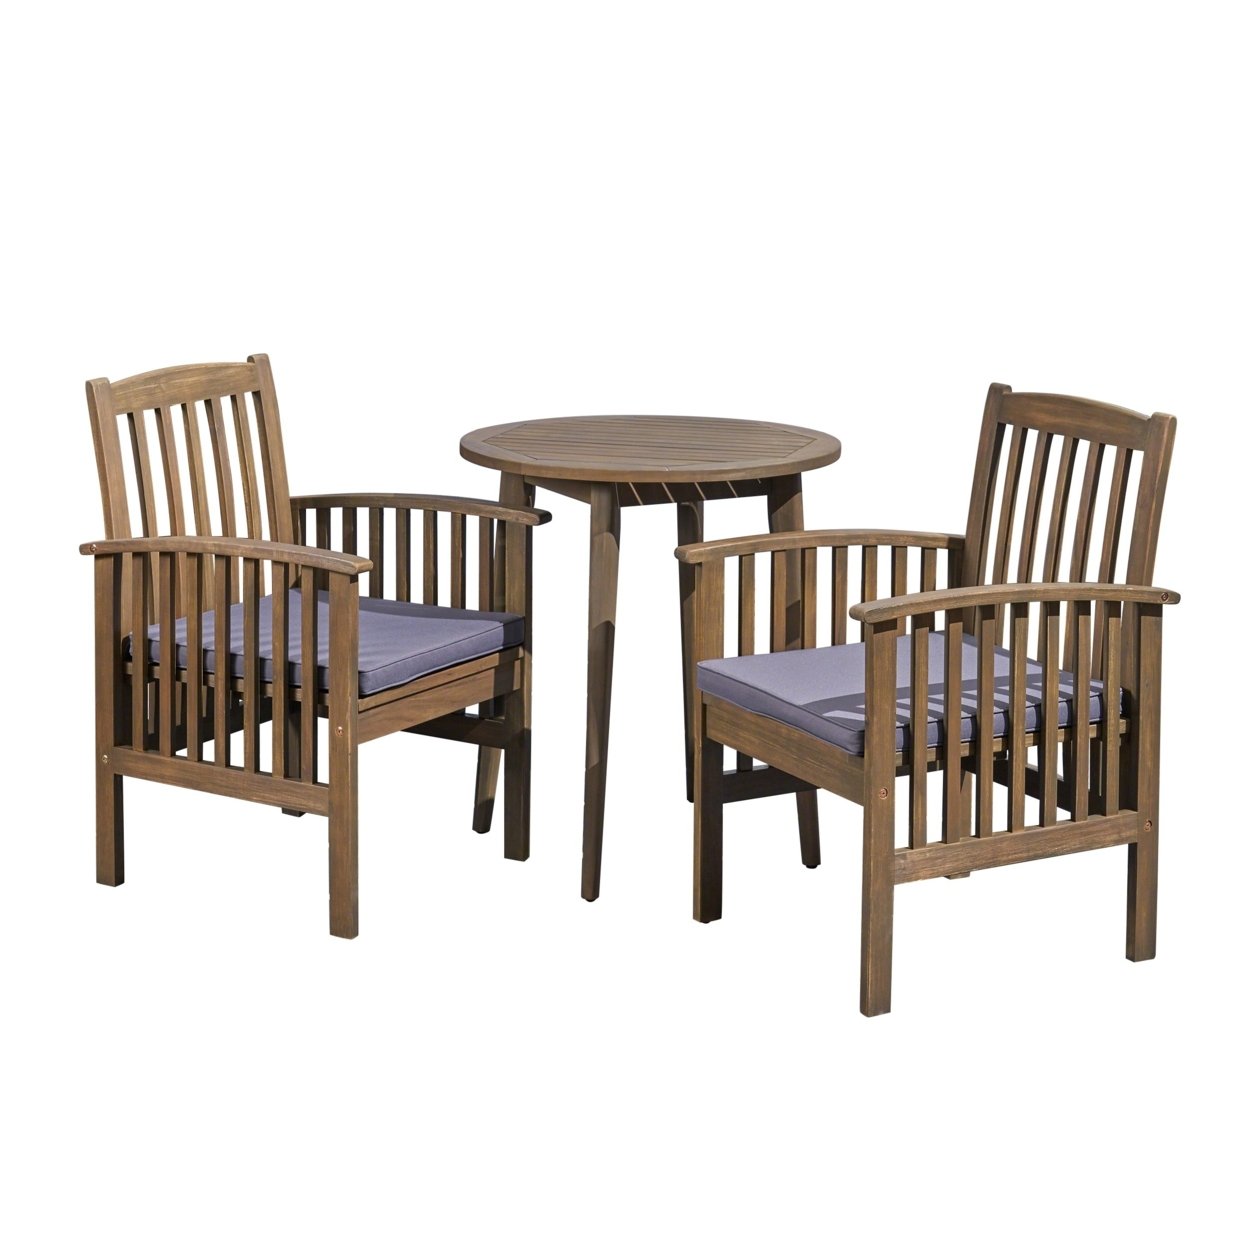 Phoenix Outdoor Acacia 2-Seater Bistro Set with Cushions and 28" Round Table with Straight Legs - Gray Finish + Dark Gray